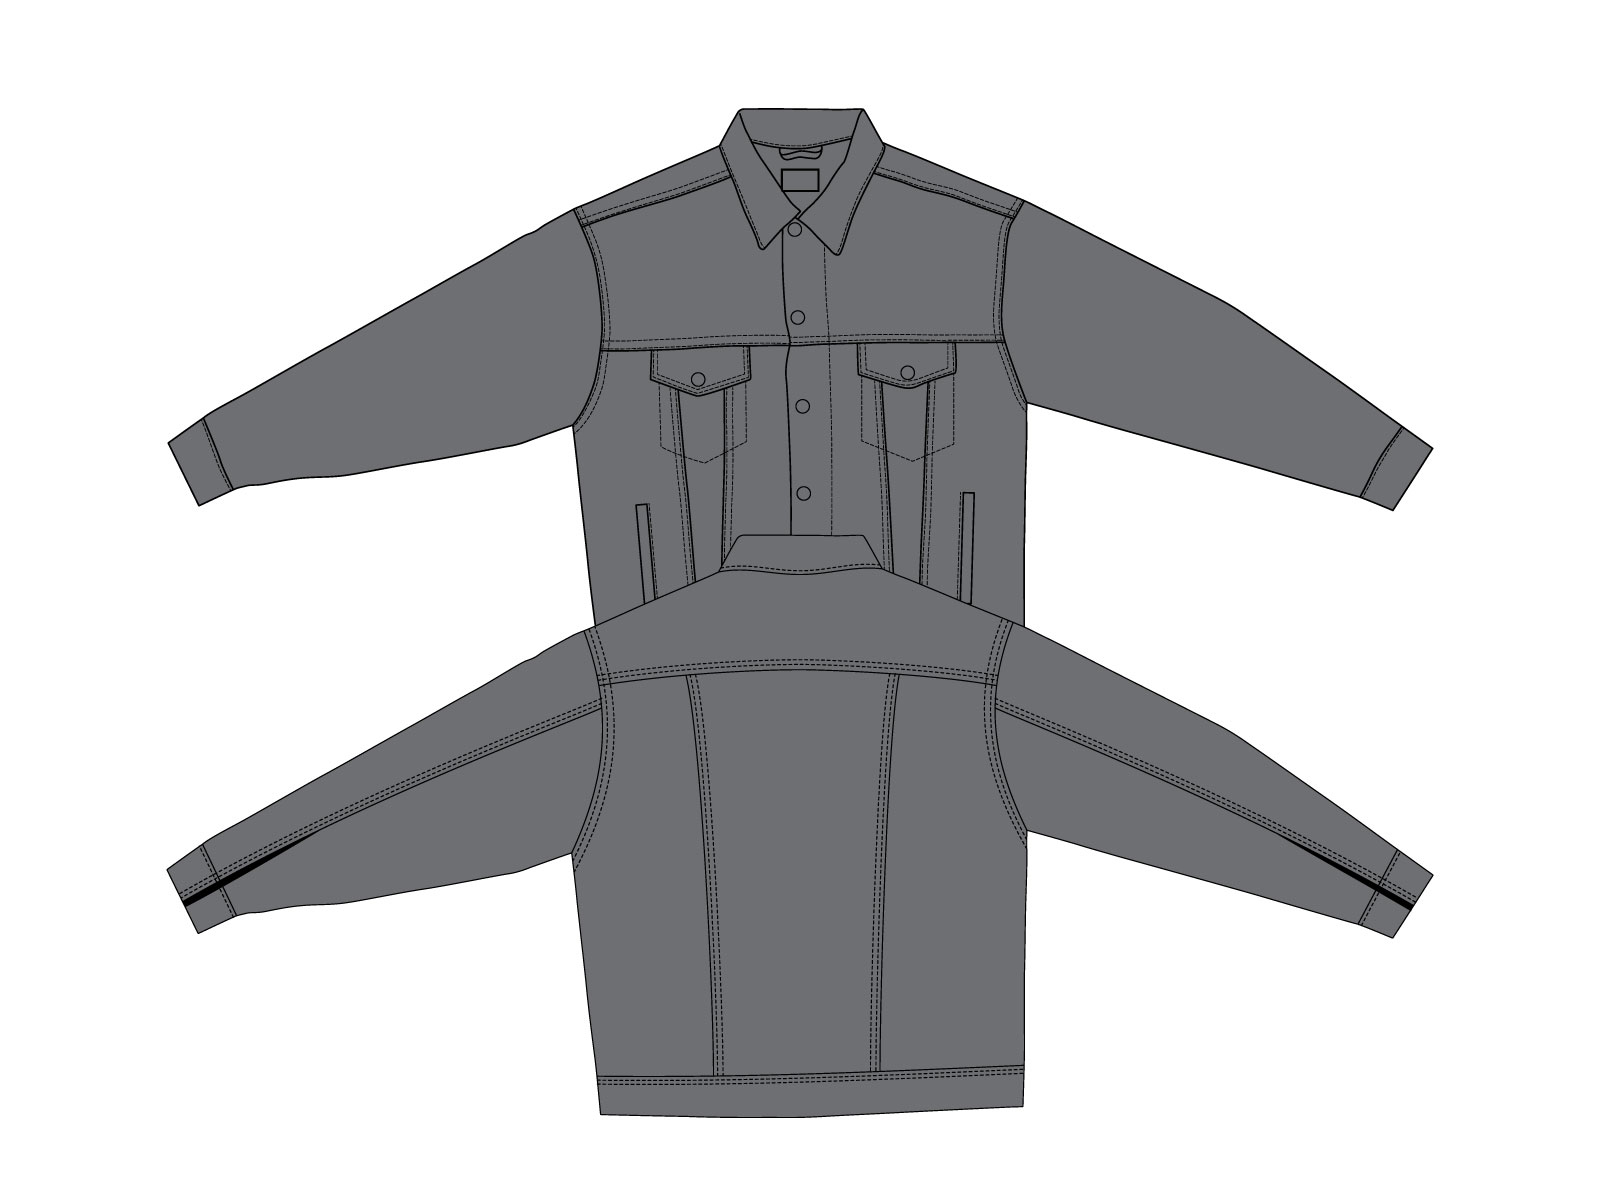 Trucker Jacket CAD / Tech Pack by Eric Hammersmith on Dribbble